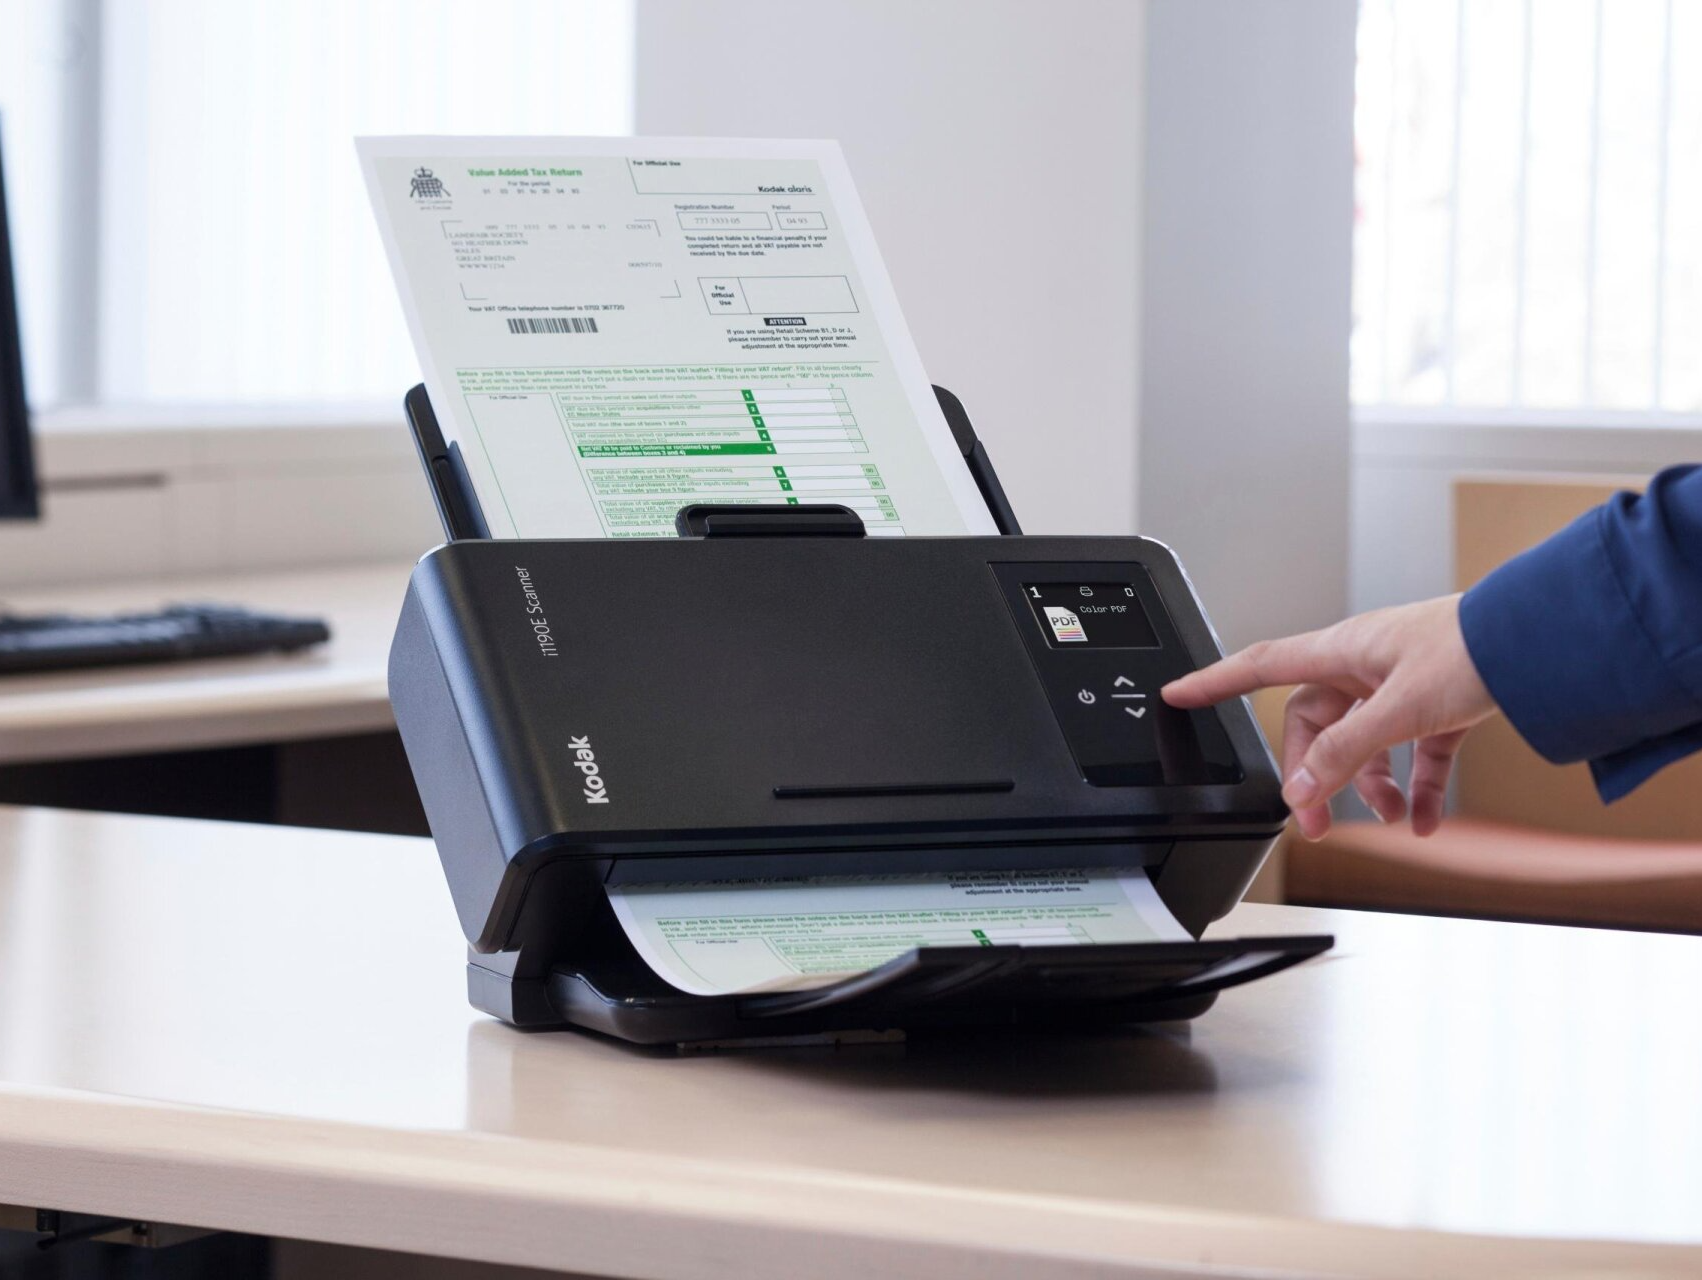 vente location scanners